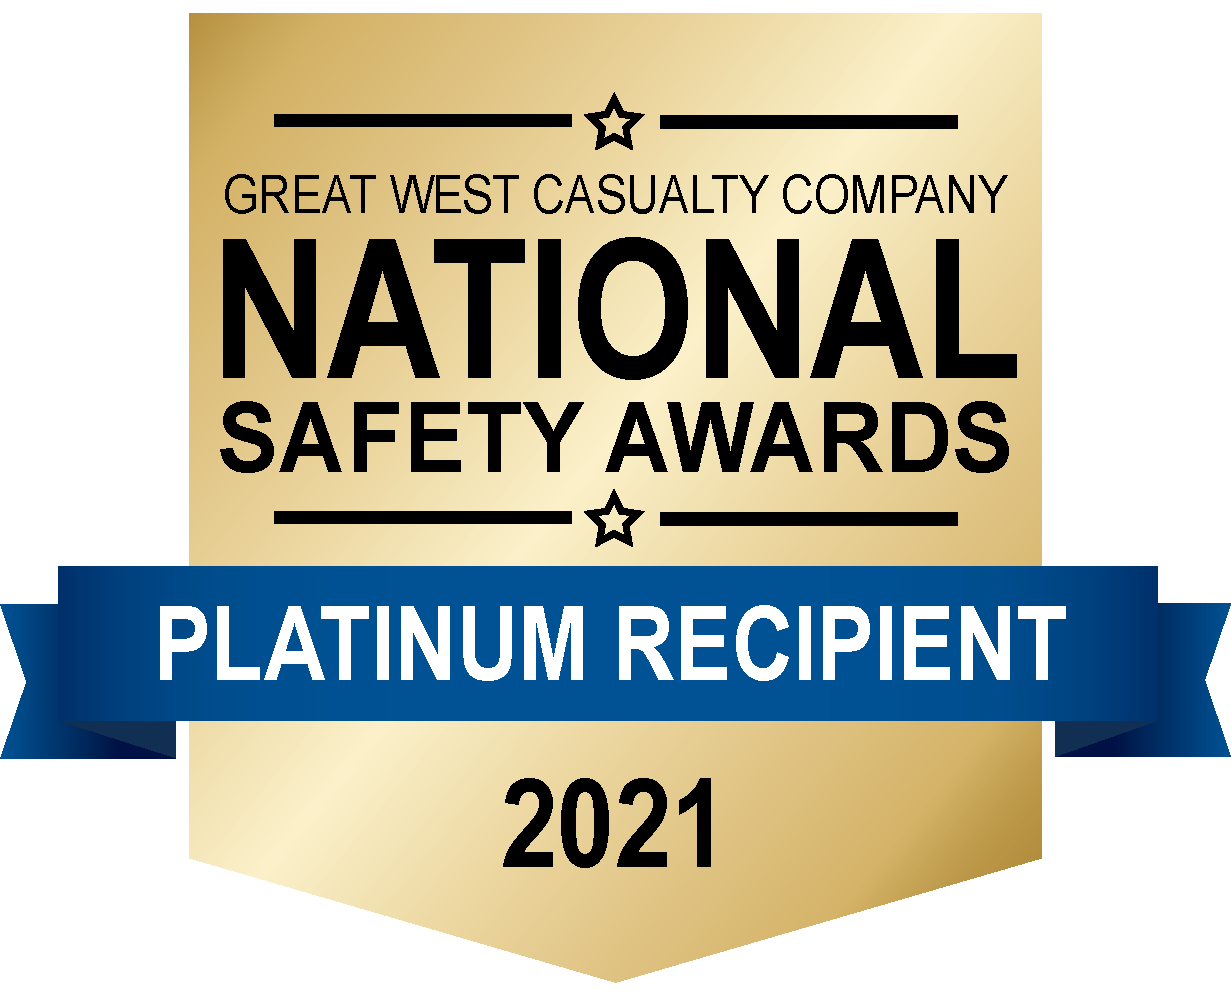 Great West Casualty Company National Safety Awards Platinum Recipient 2021